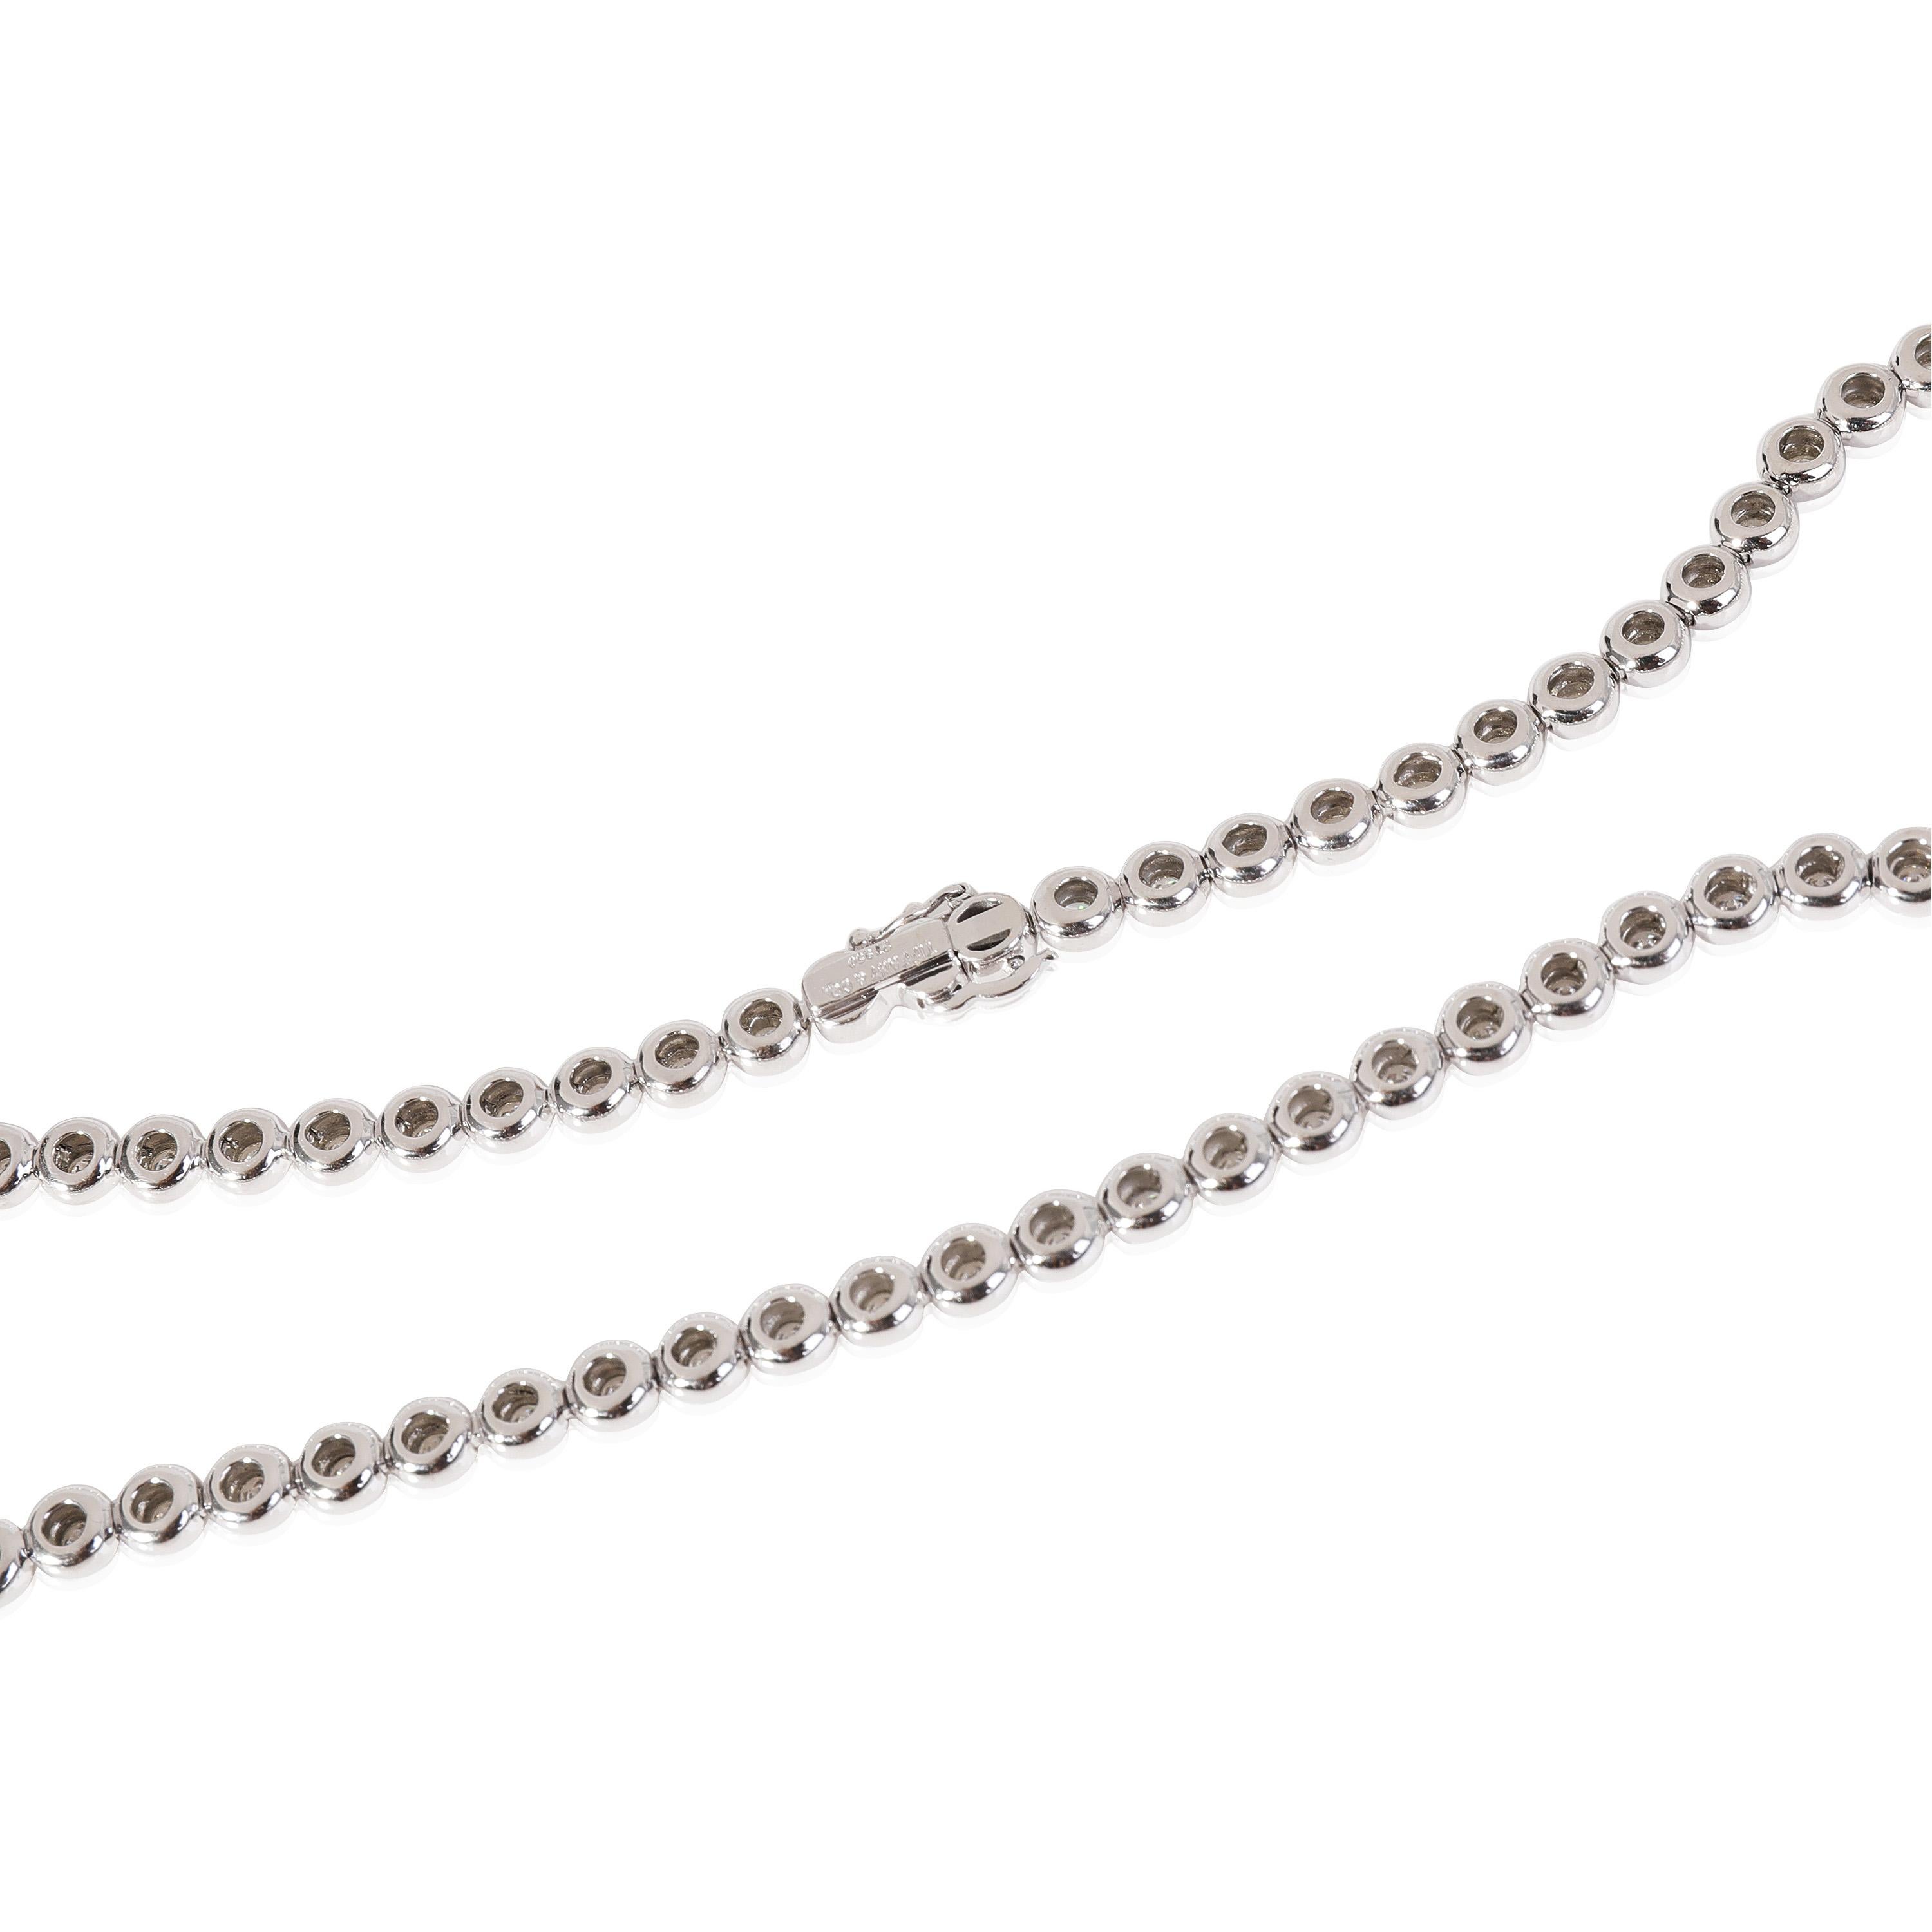 Tiffany & Co. Diamond Necklace in Platinum (5.50 CTW)

PRIMARY DETAILS
SKU: 120724
Listing Title: Tiffany & Co. Diamond Necklace in Platinum (5.50 CTW)
Condition Description: Retails for 30000 USD. In excellent condition and recently polished.